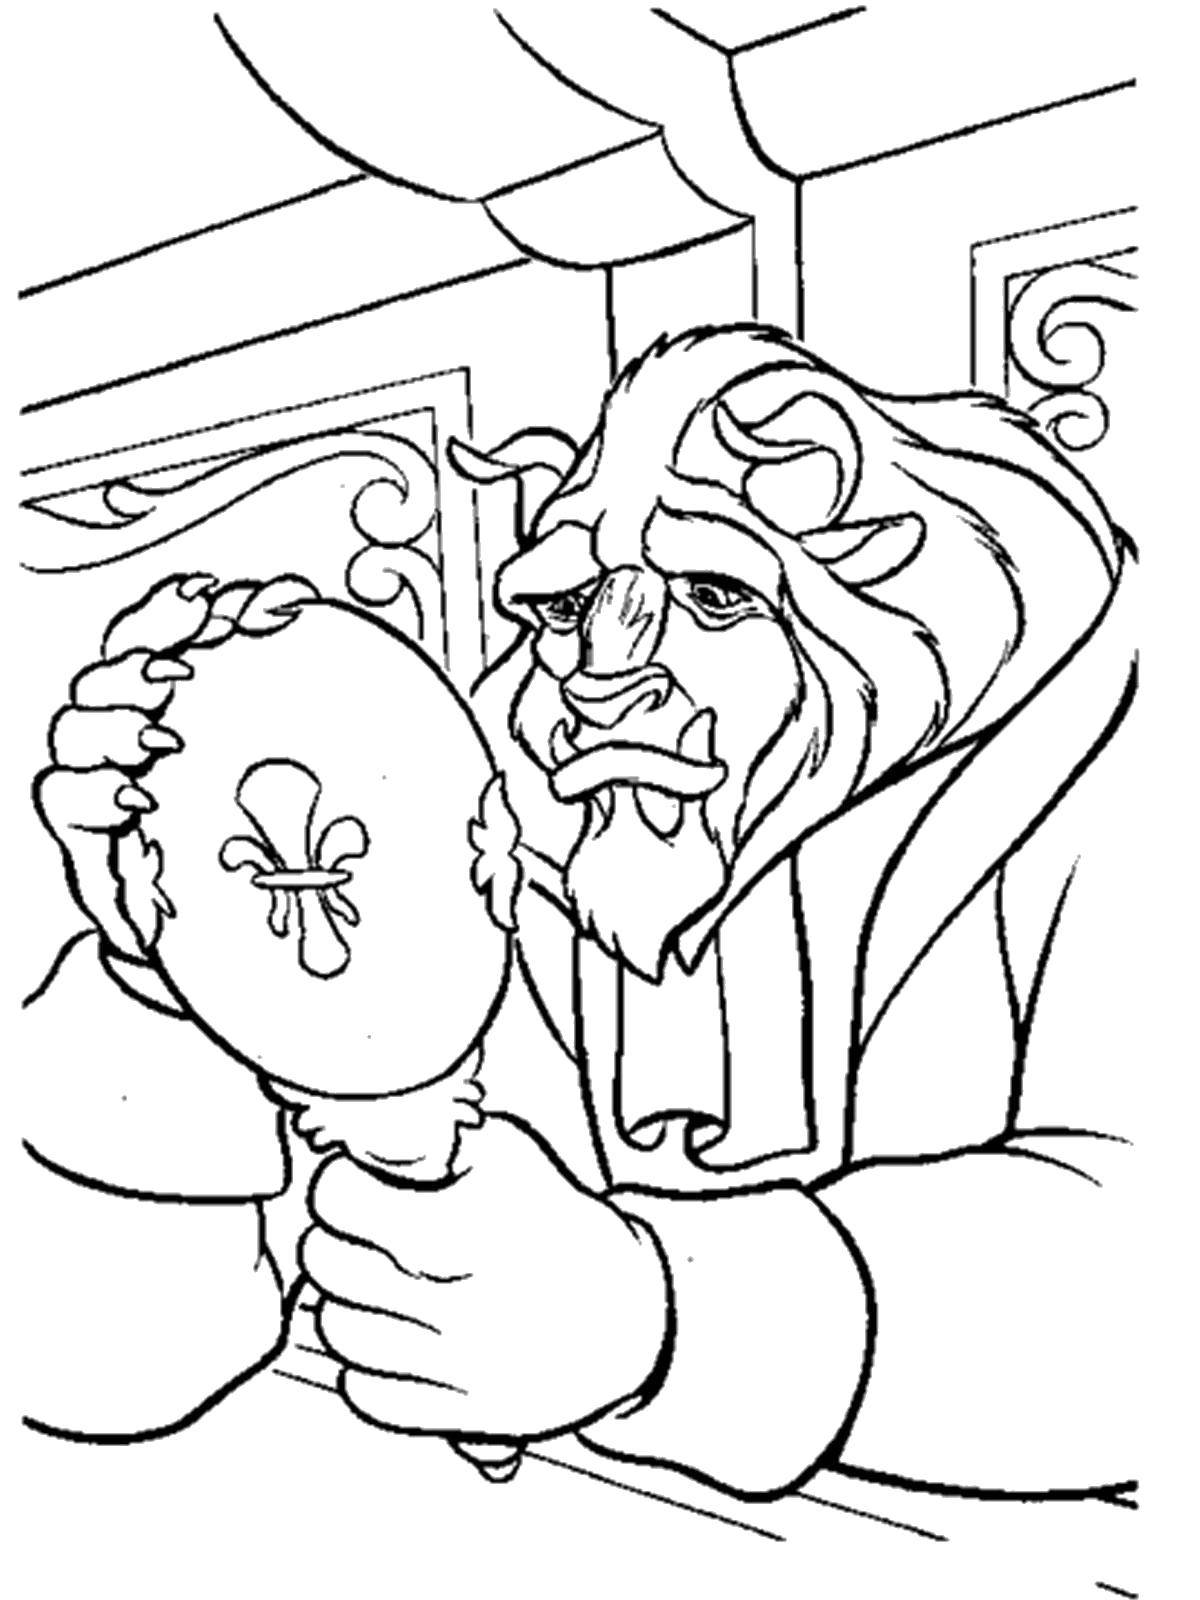 Coloring The monster looks in the mirror. Category Disney cartoons. Tags:  Disney, "beauty and the beast".